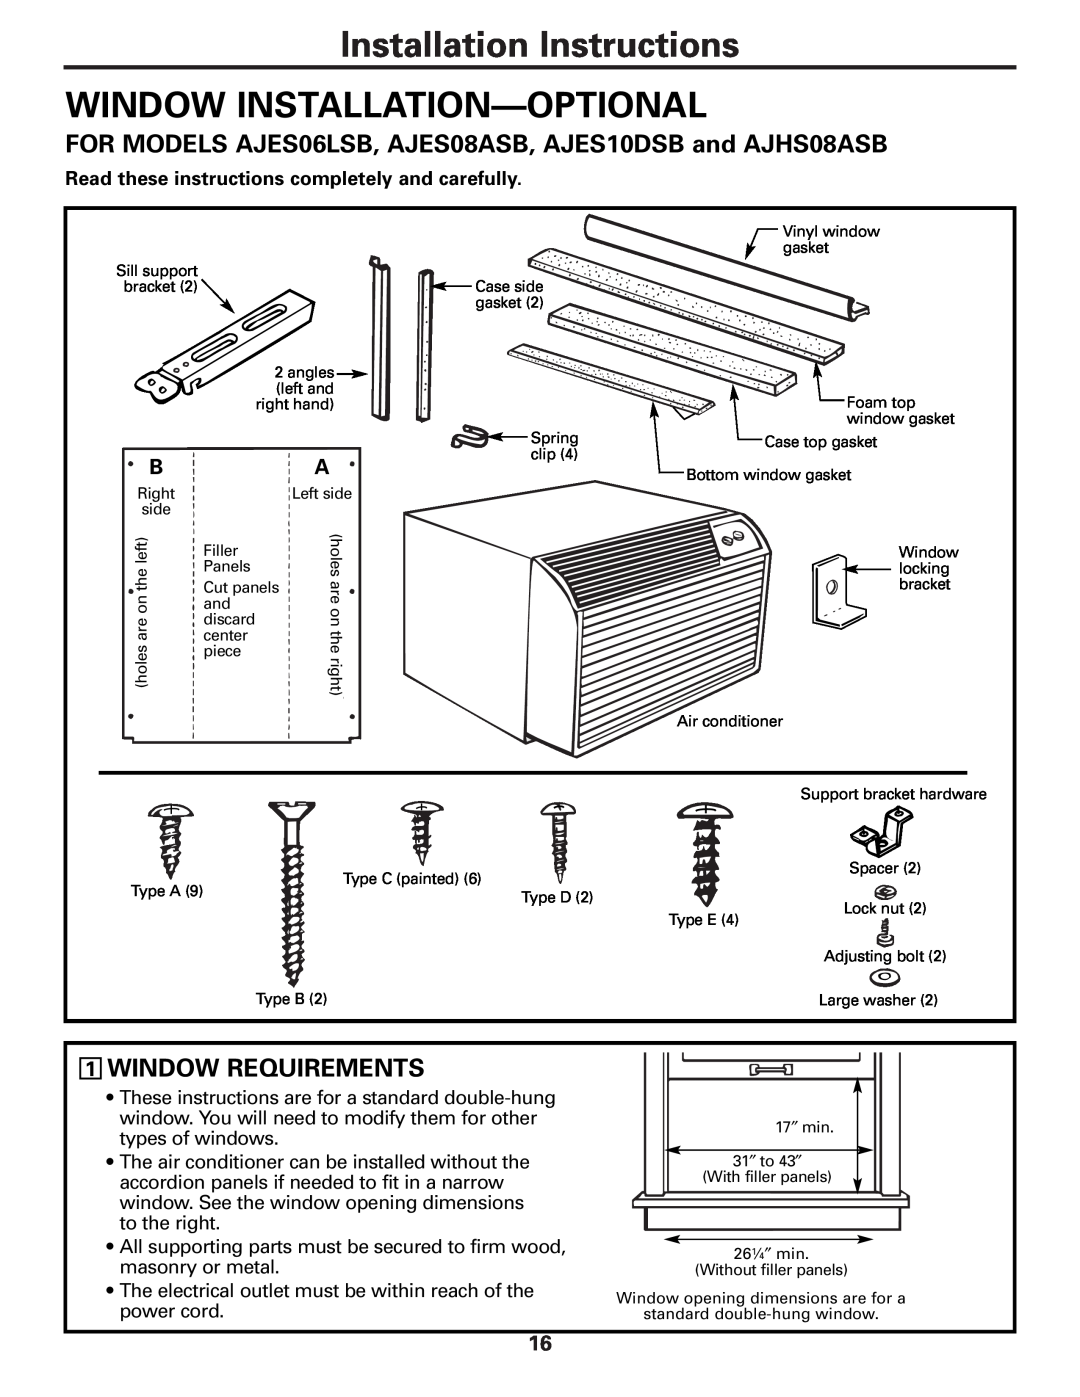 GE Cool Only installation instructions Window Installation—Optional, Window Requirements, Installation Instructions 